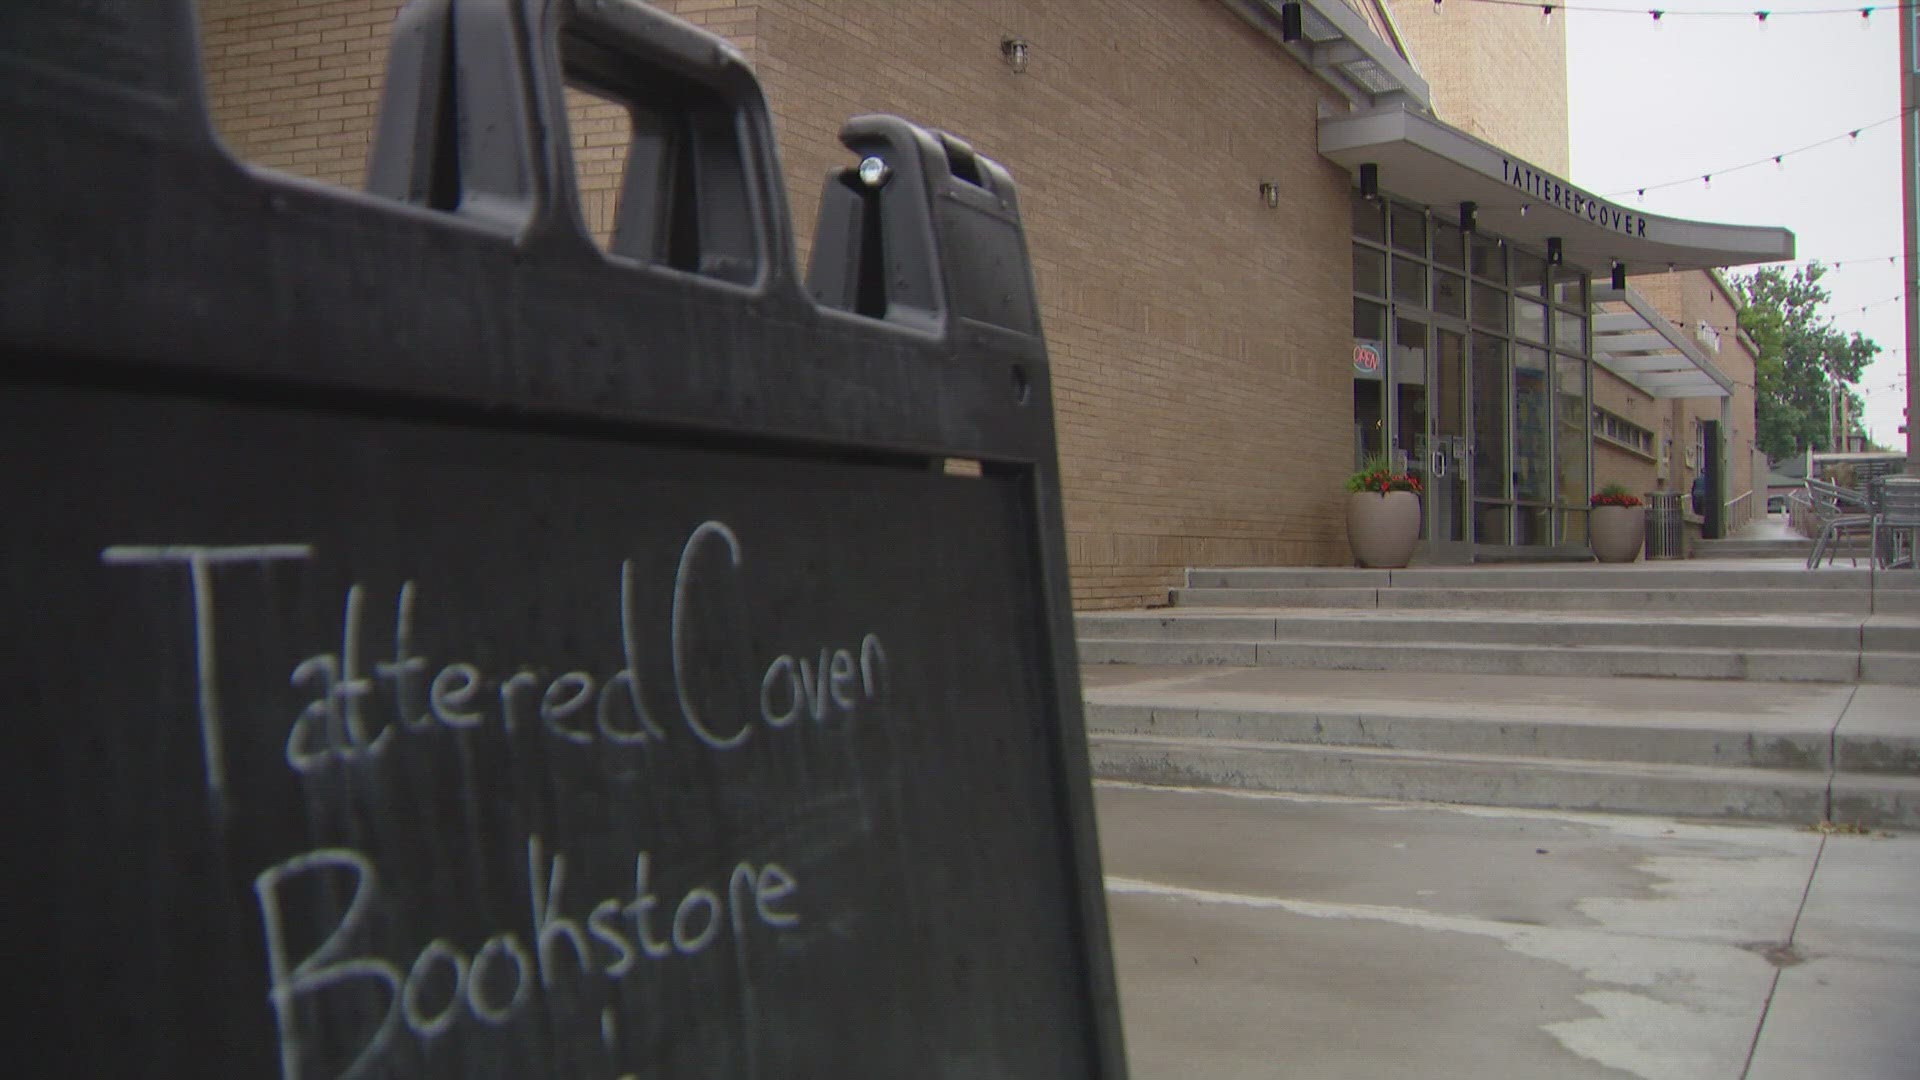 9NEWS Legal Expert Whitney Traylor explains what the bookstore chain Tattered Cover's Chapter 11 bankruptcy filing means for the business and its employees.